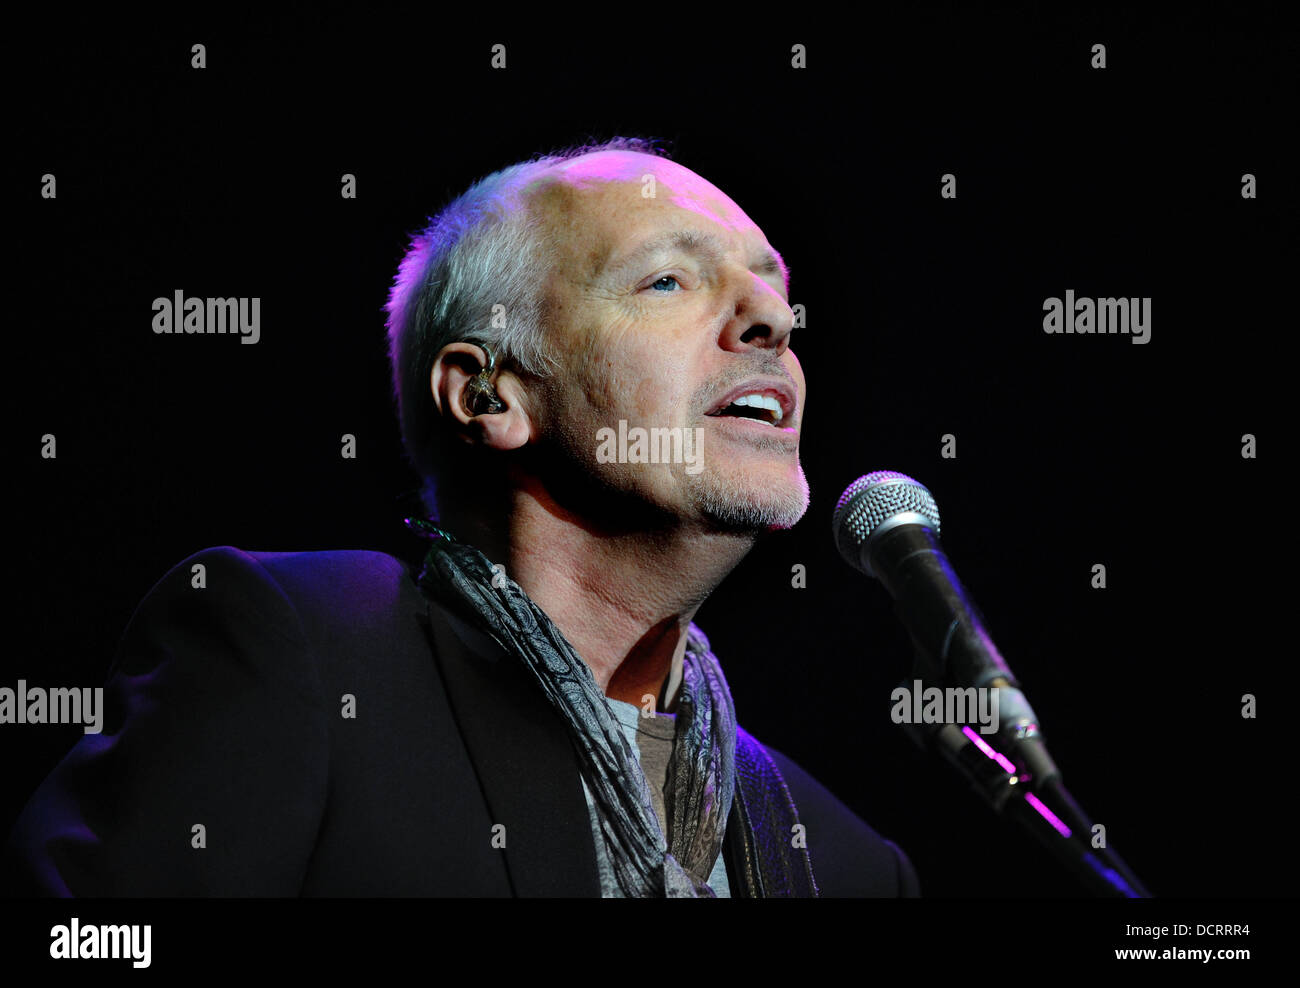 Peter Frampton performing 'Frampton Comes Alive' 35th Anniversary Tour at the sold out Heineken Music Hall Amsterdam, Holland - 19.11.11 Stock Photo